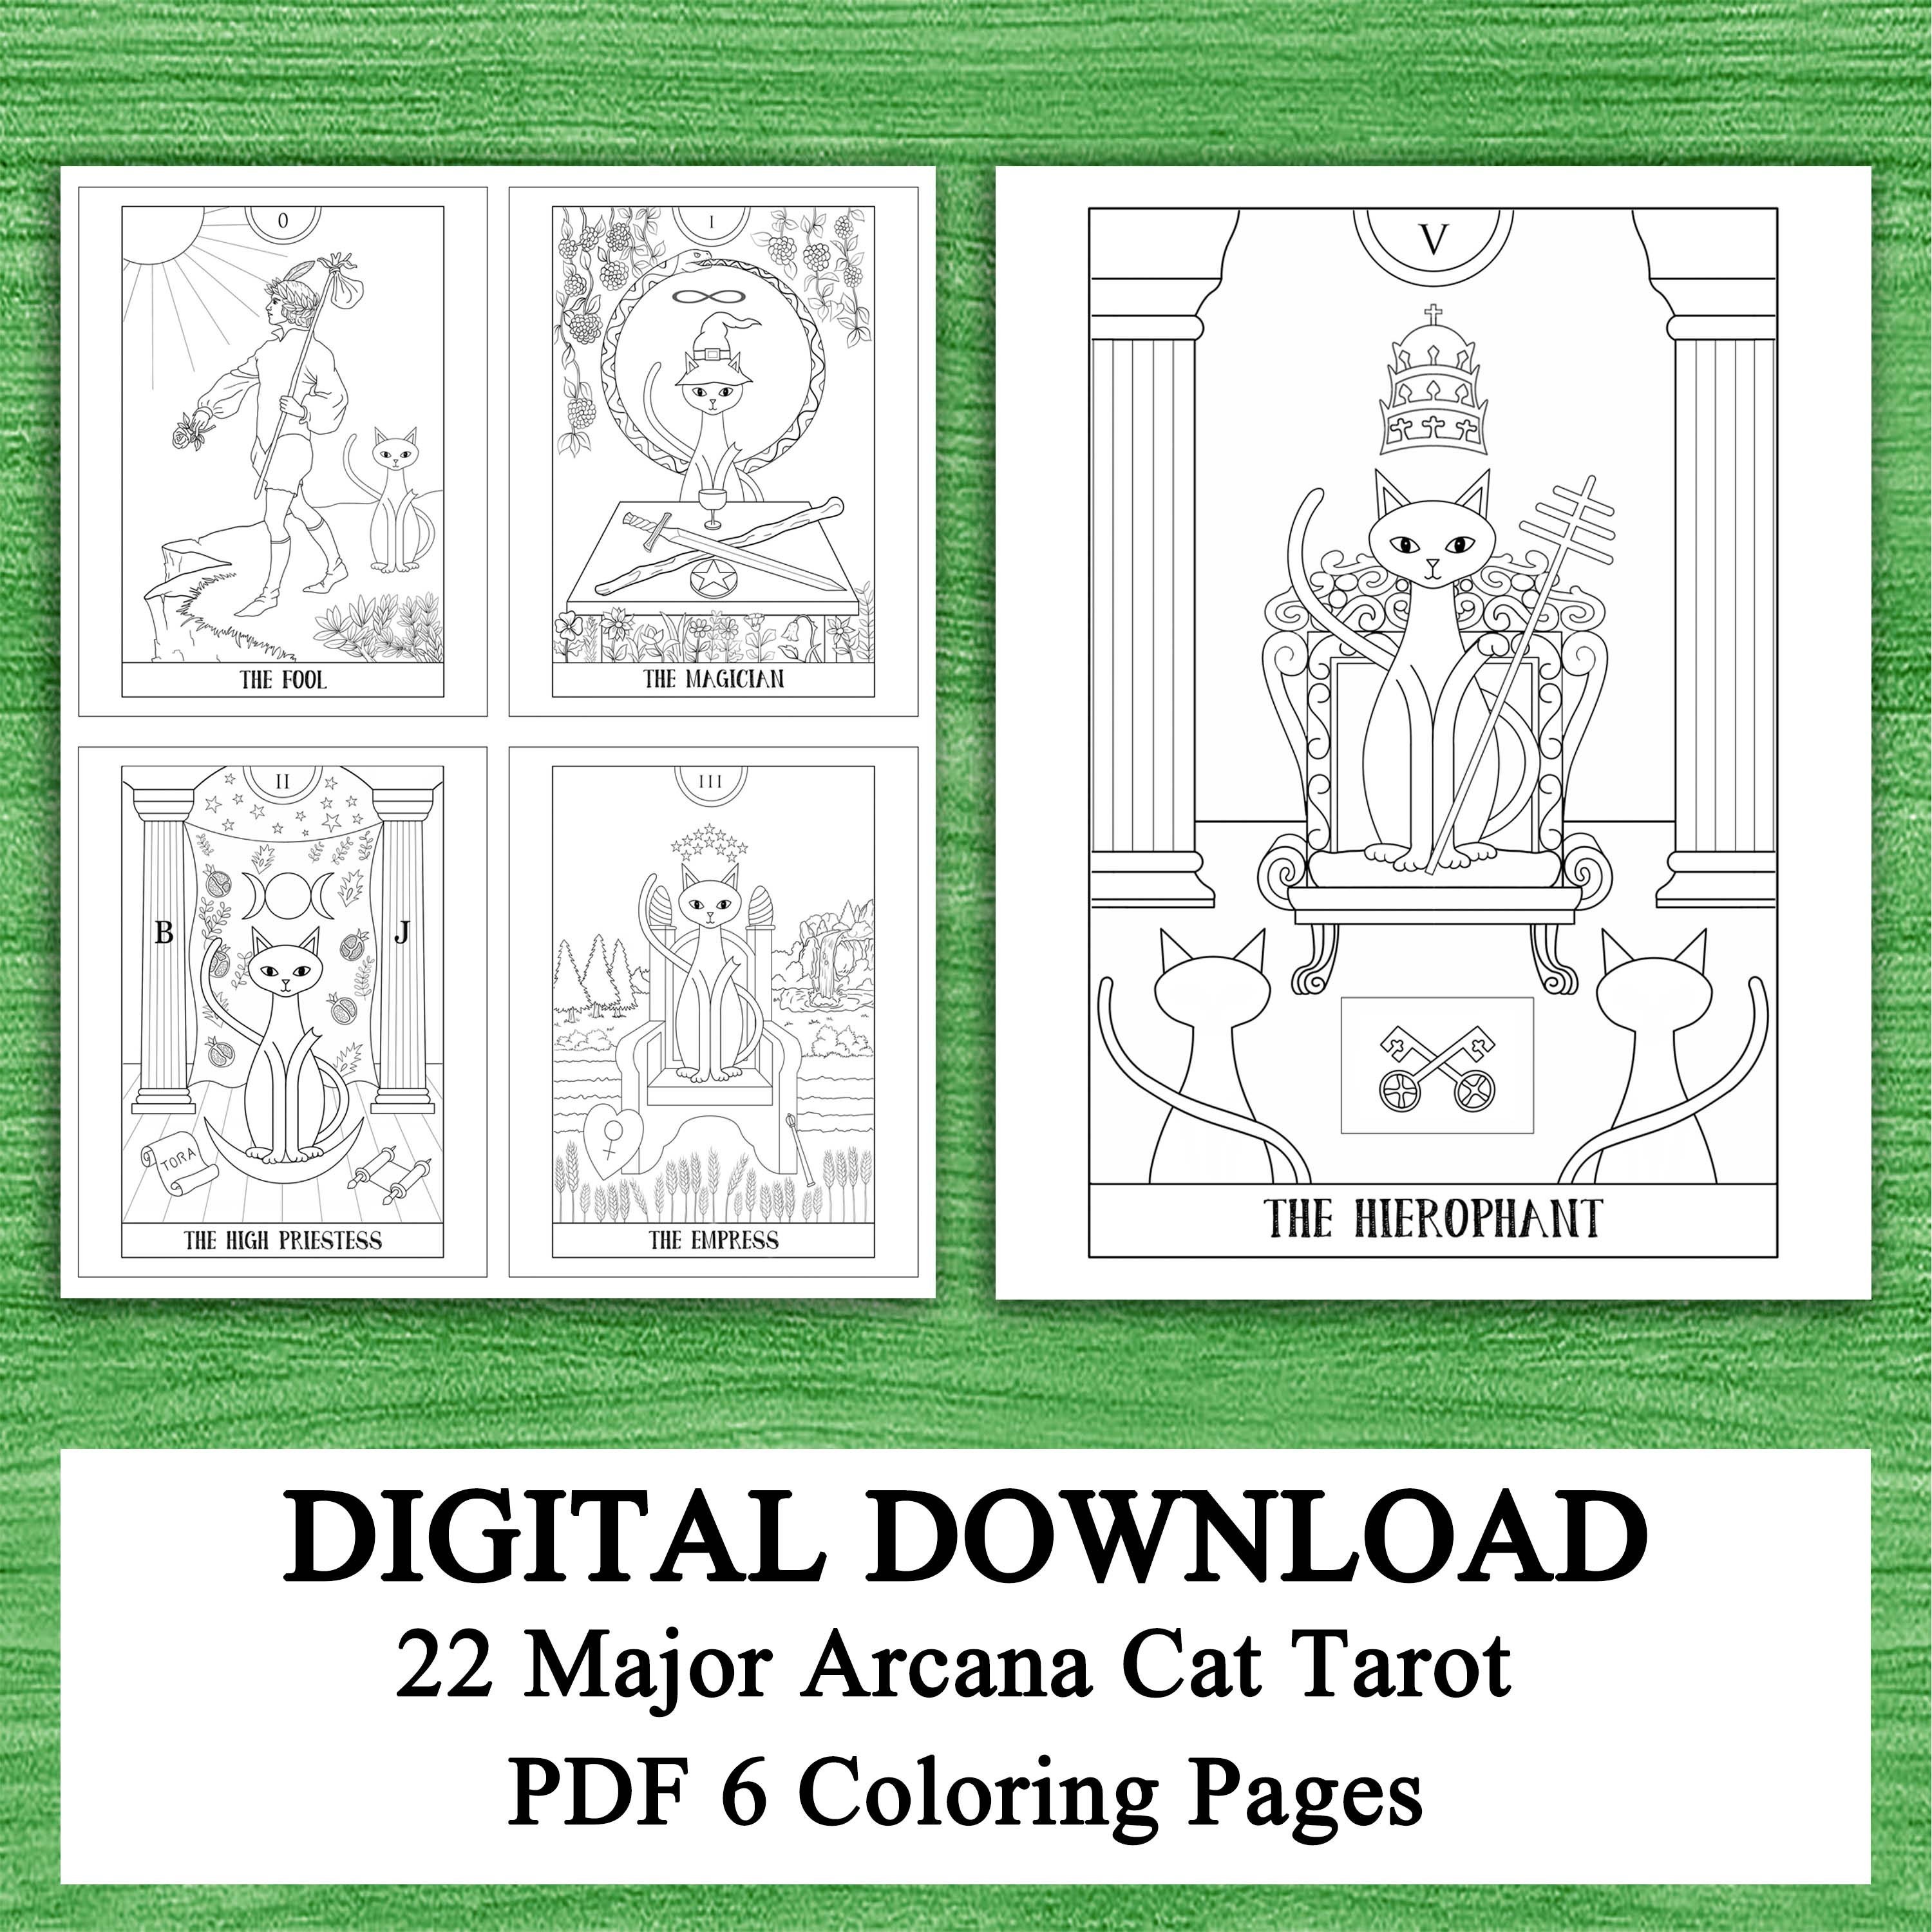 Zodiac Signs TEMPLATES for Watercolor Painting. Horoscope COLORING Pages.  Astrology Coloring Book PDF Printable. 